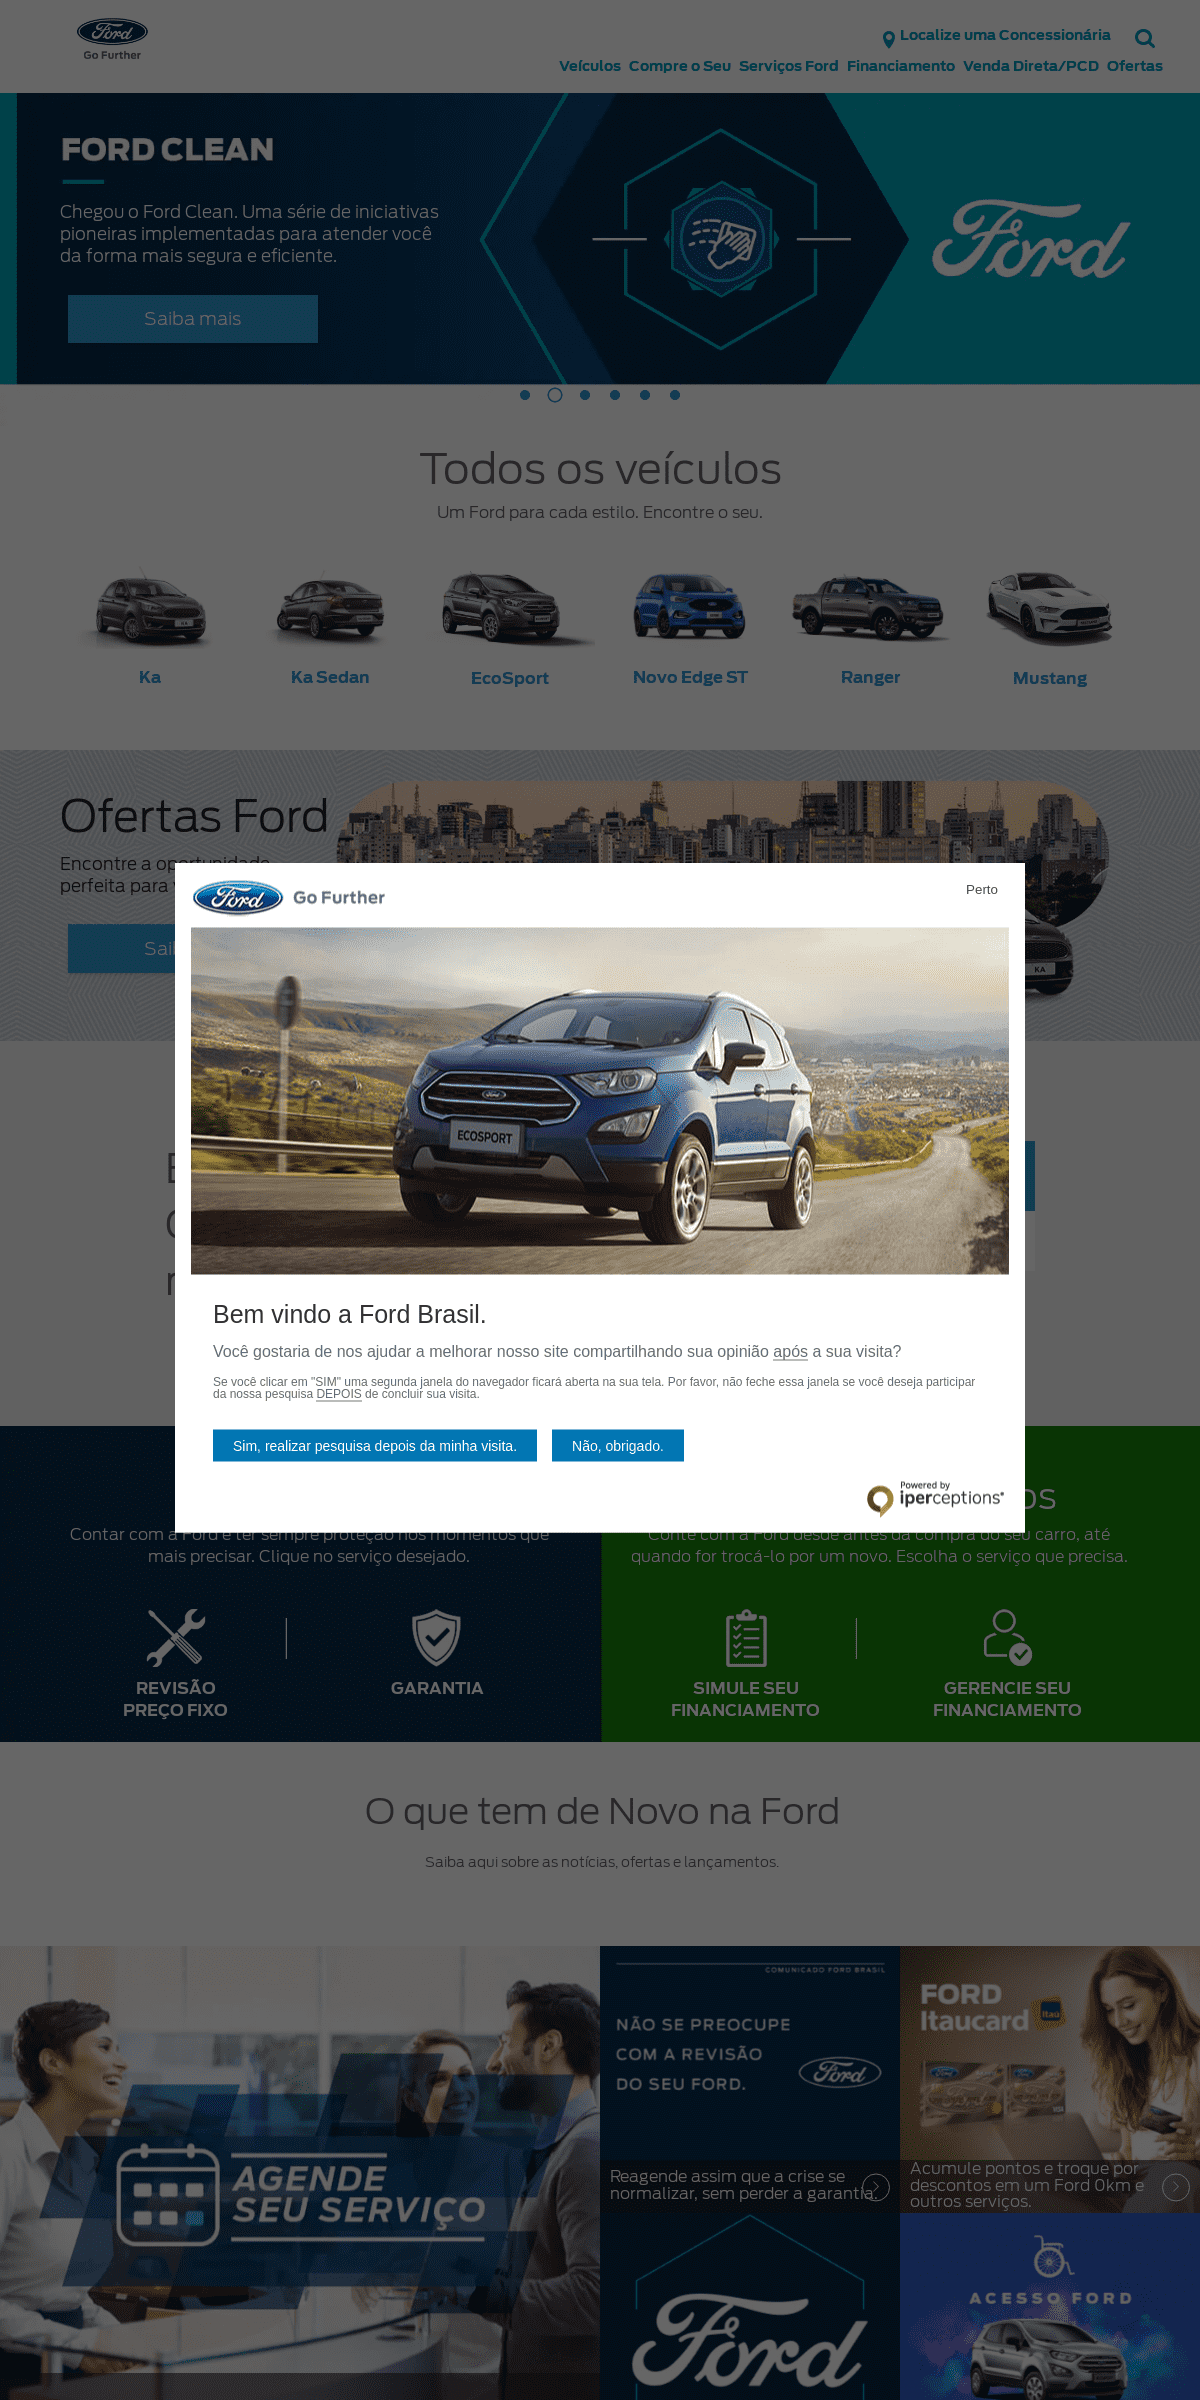 A complete backup of ford.com.br